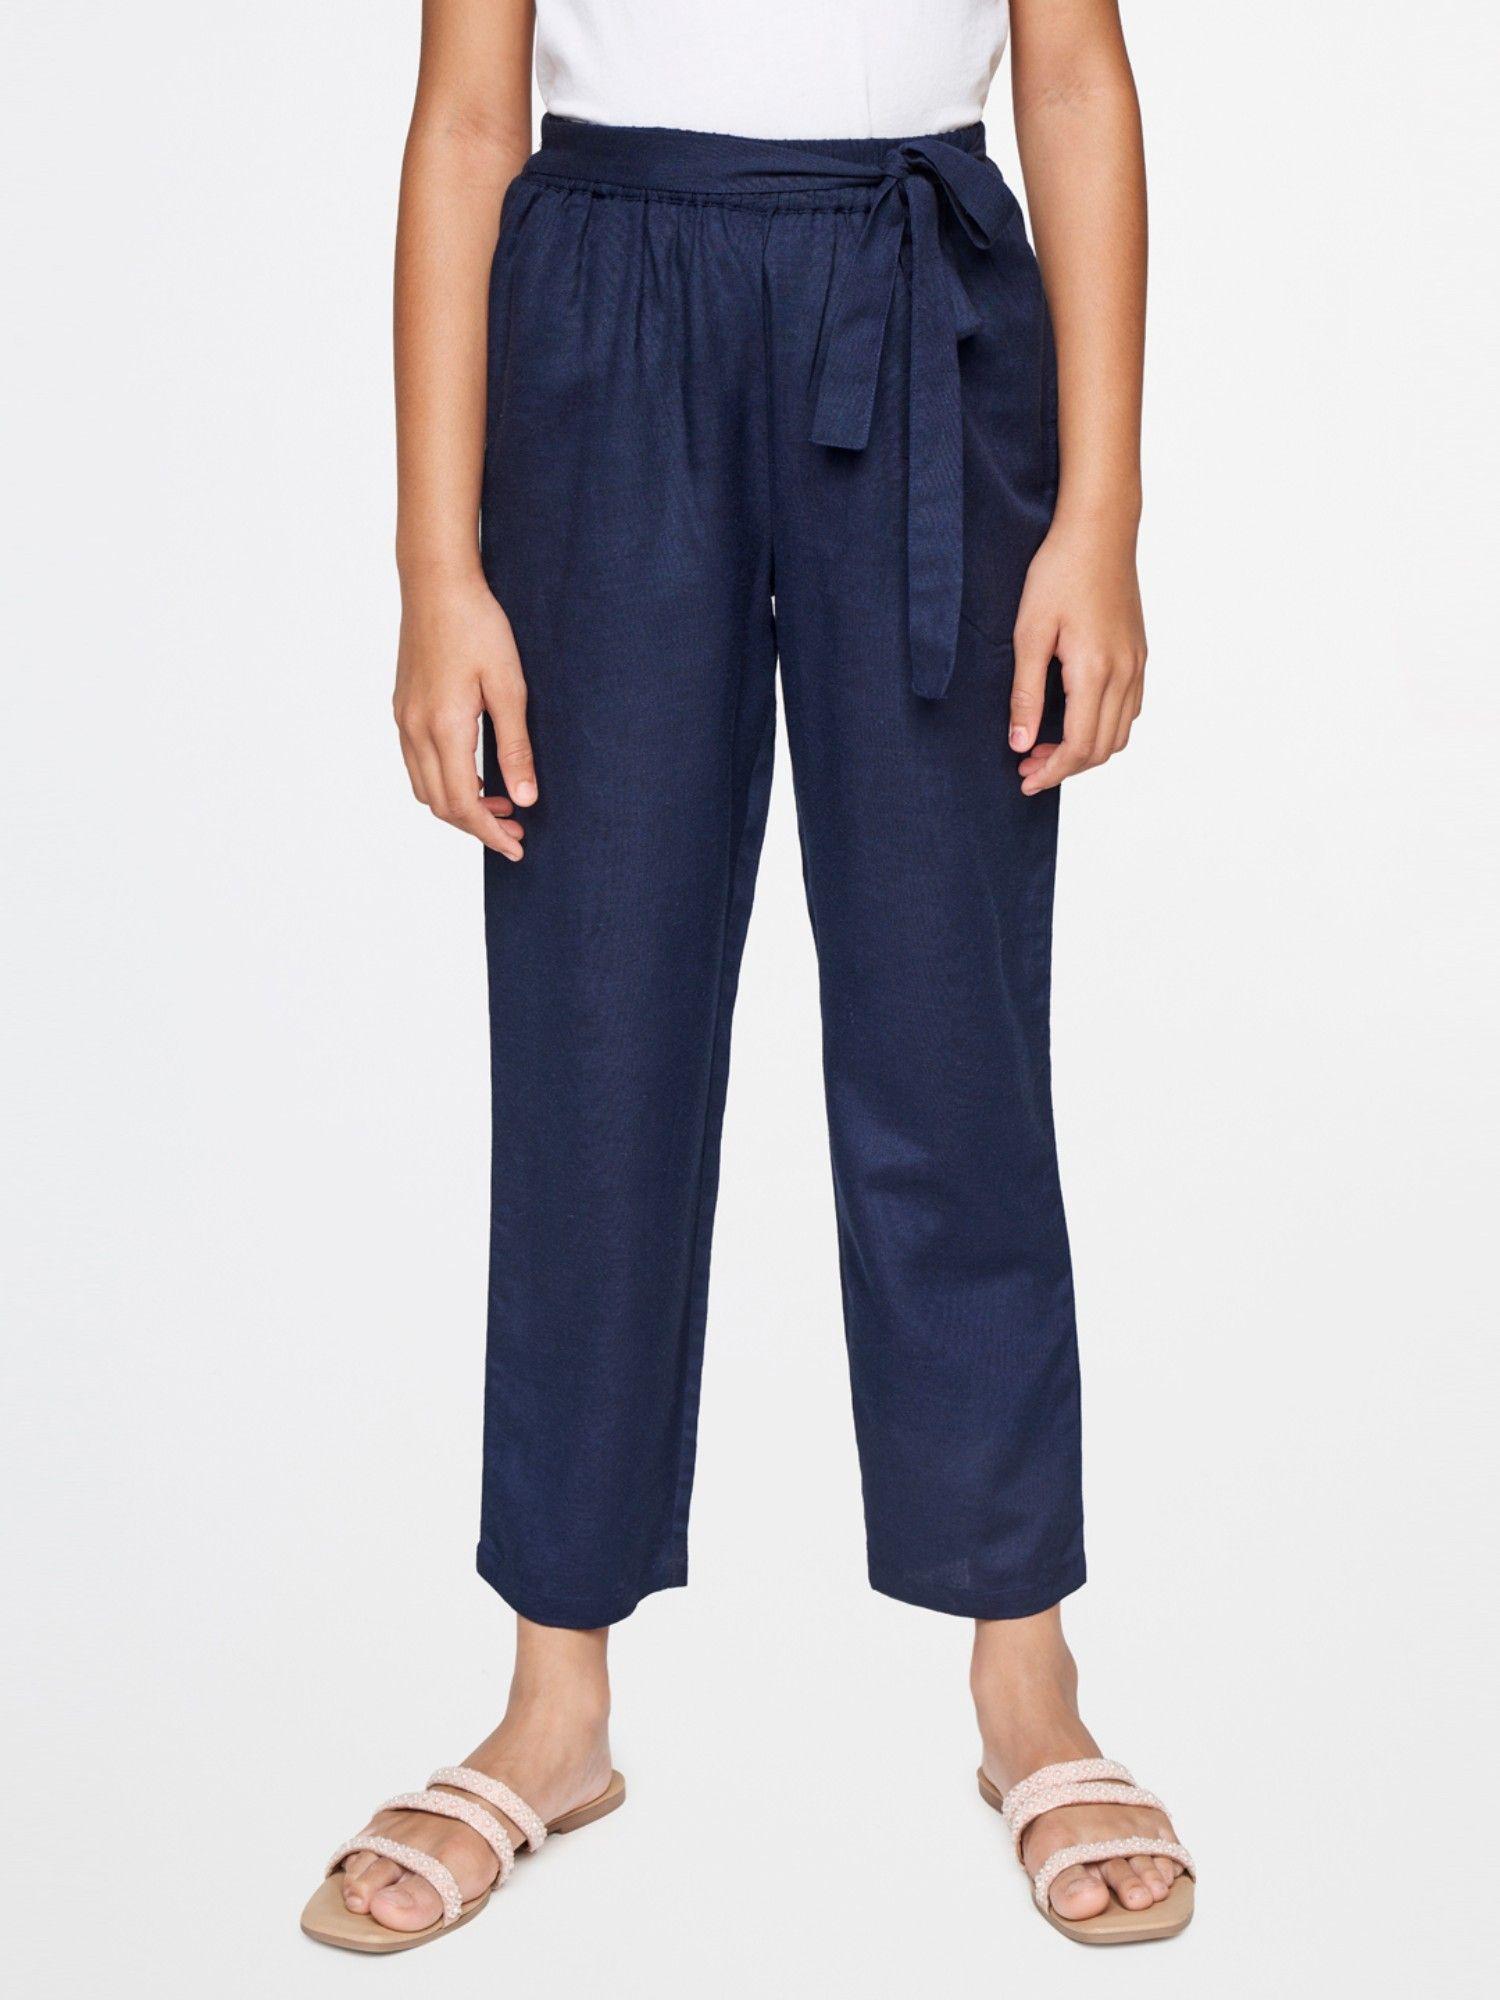 navy blue casual trousers